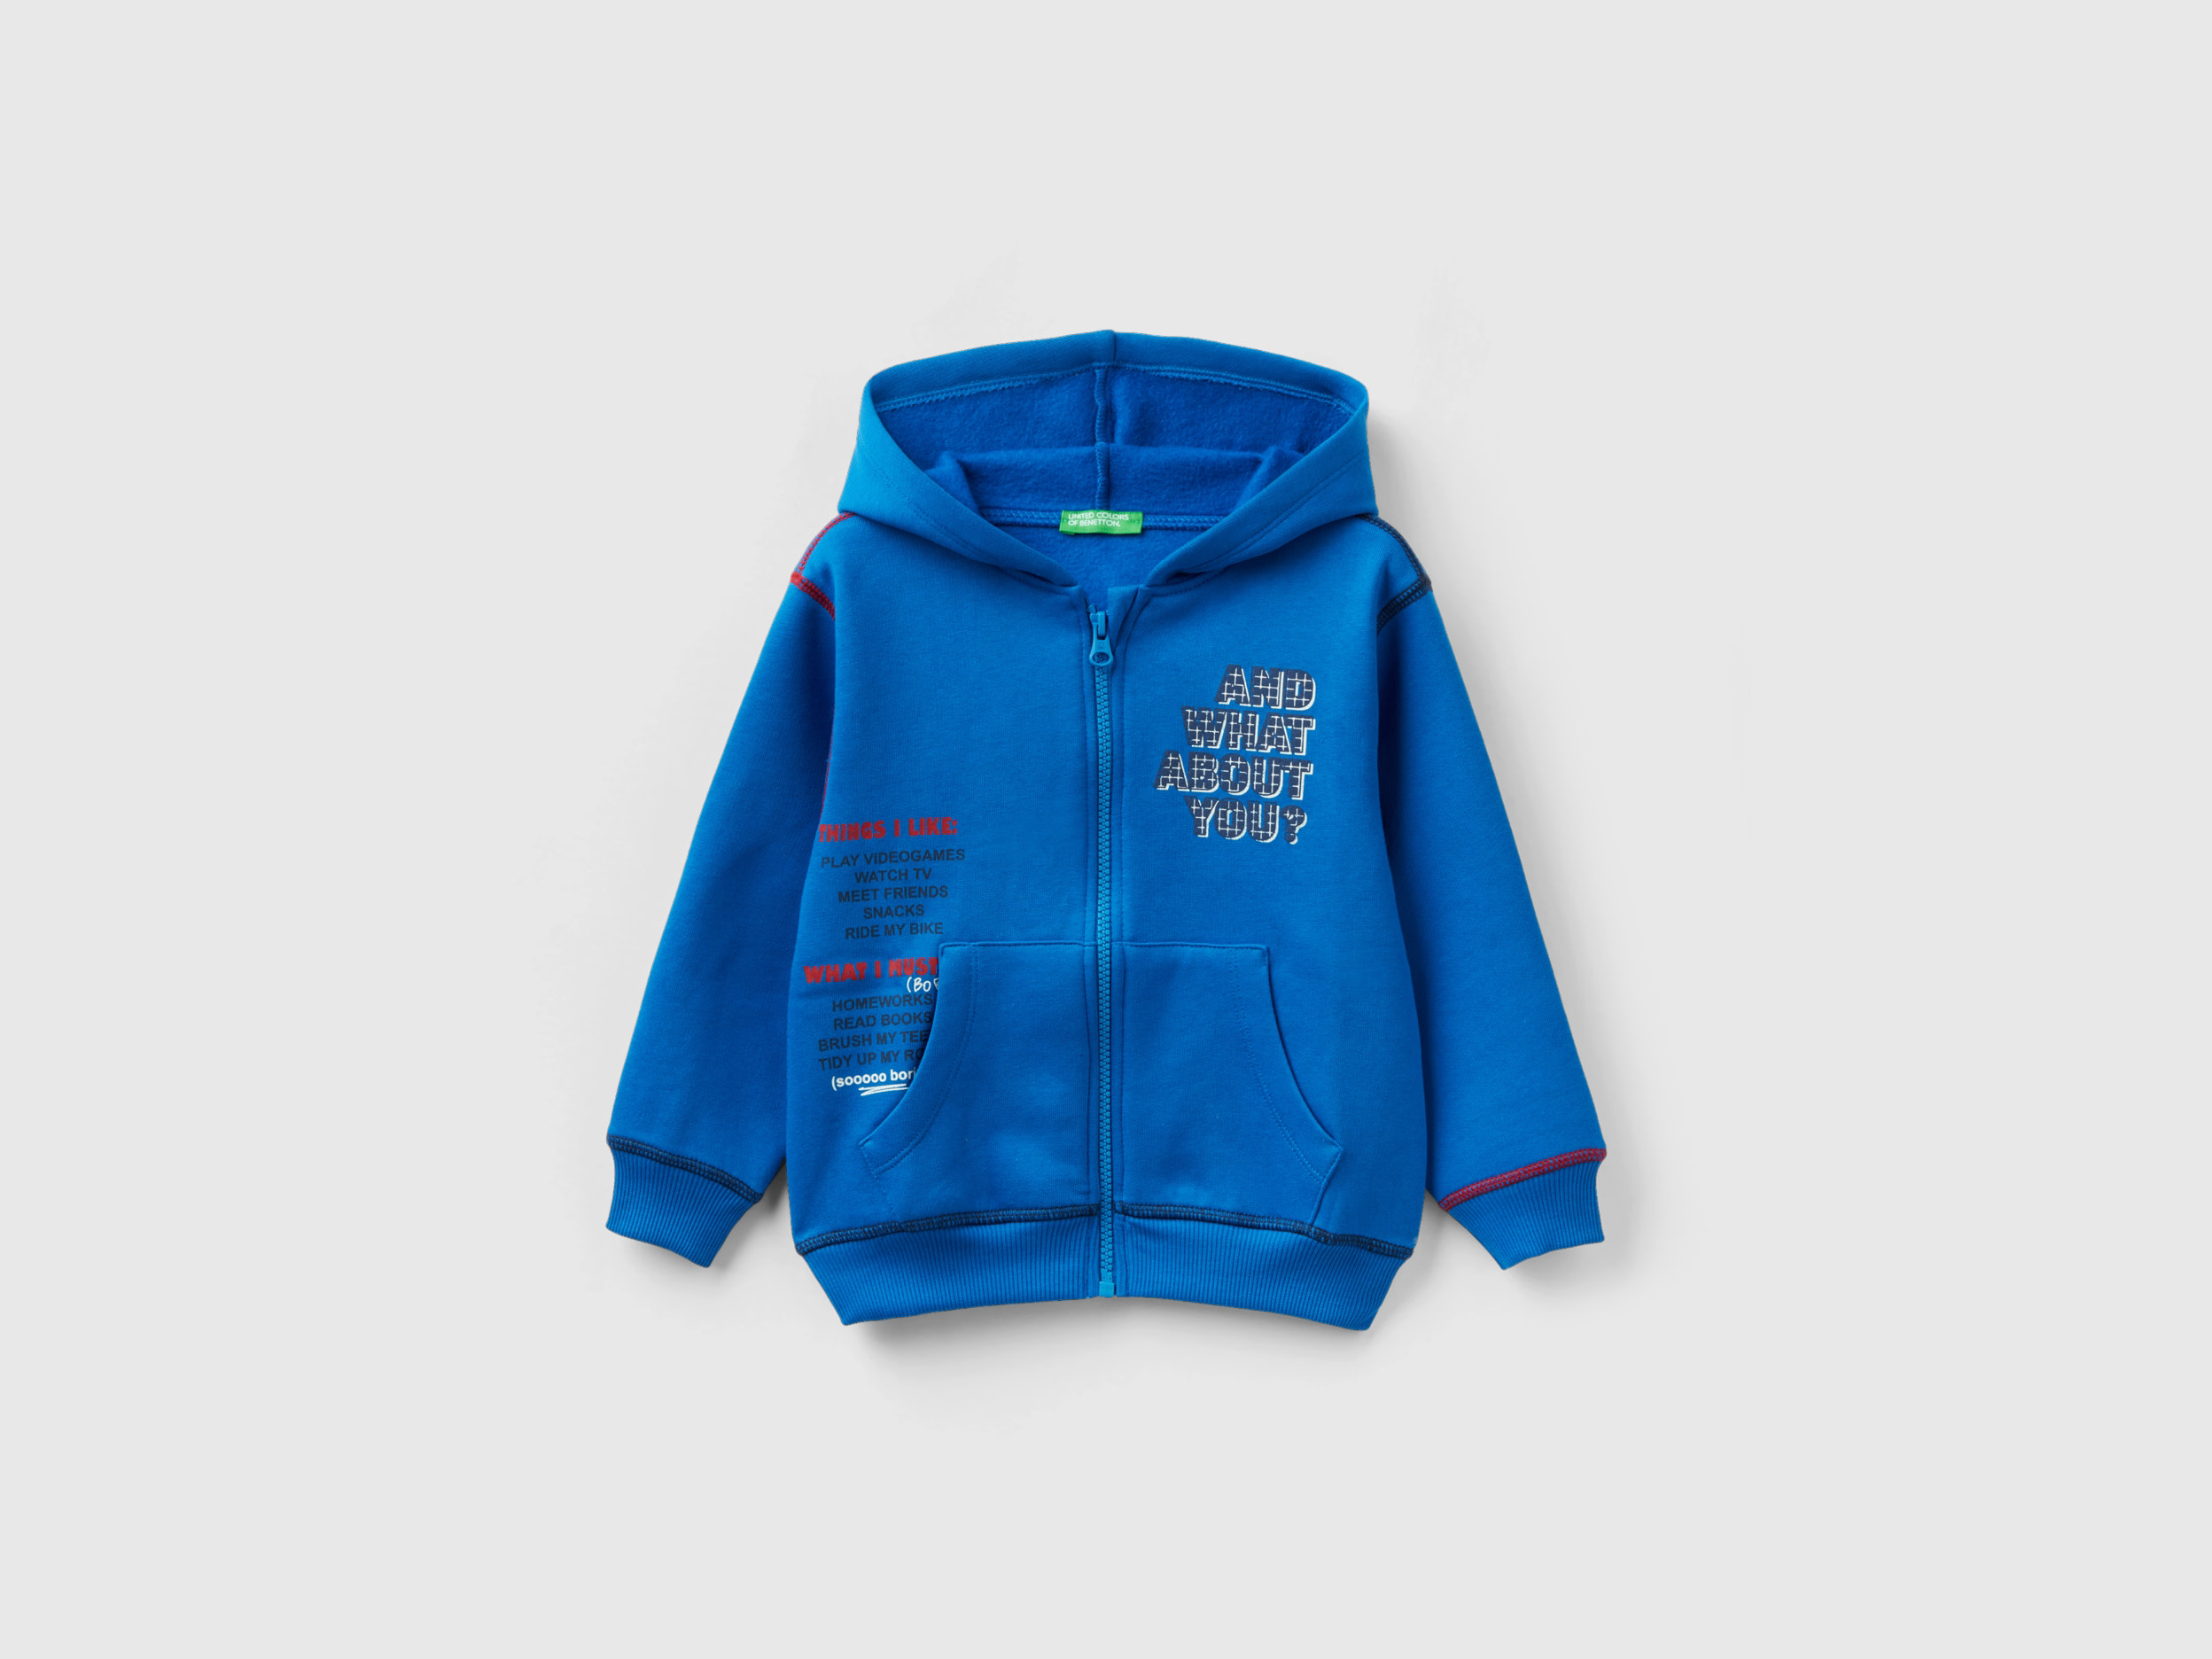 Benetton, Oversized Sweatshirt With Hood And Print, size 2-3, Bright Blue, Kids